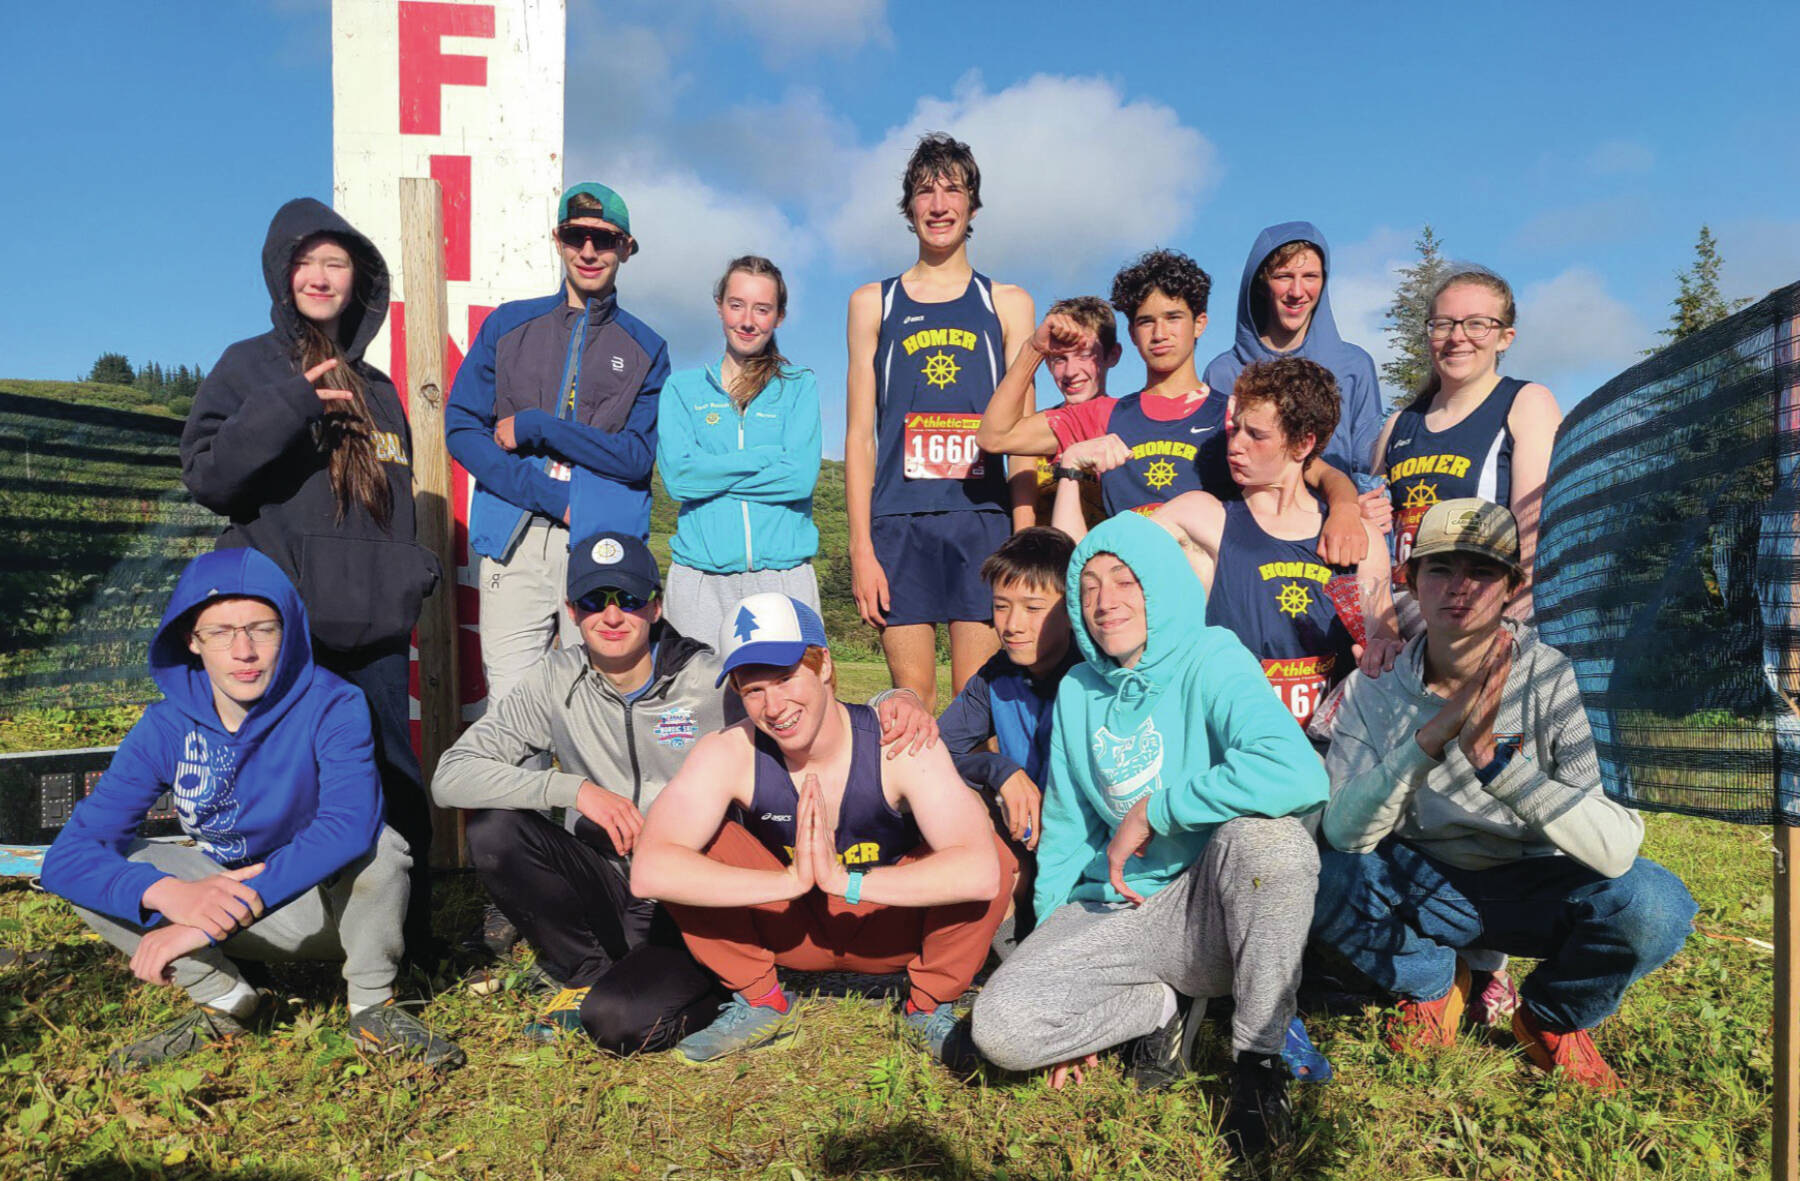 Photo provided by Lucas Parsley
Members of the Homer High School cross country running teams pose at the end of the meet at the Lookout Mt. ski trails on Sept. 1.